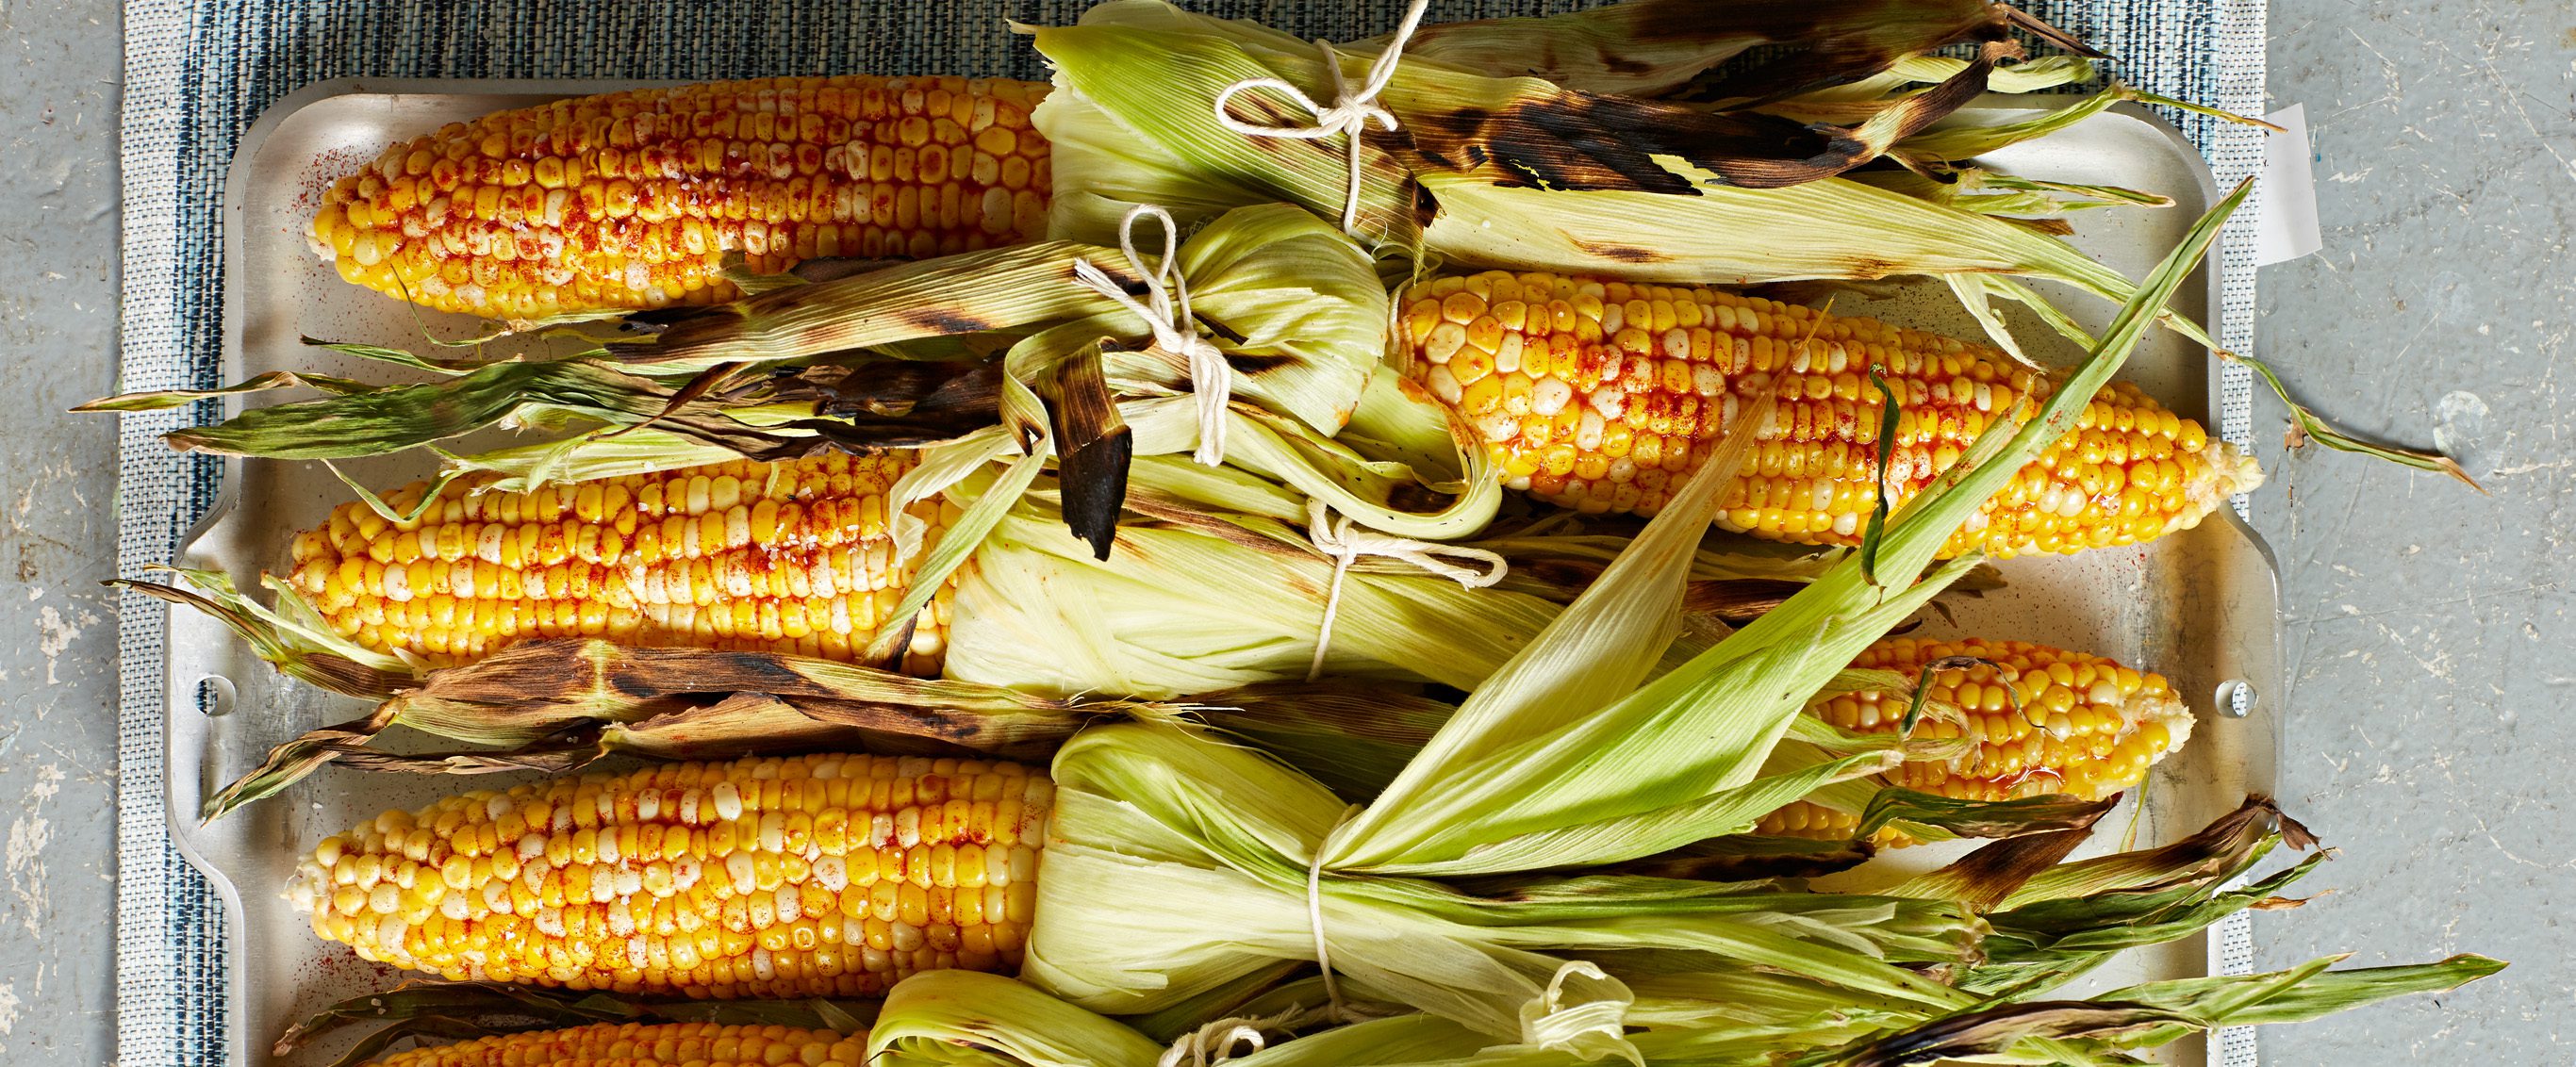 Grilled Corn On The Cob With Chipotle Lime Rub Forks Over Knives,Serpae Tetra Size